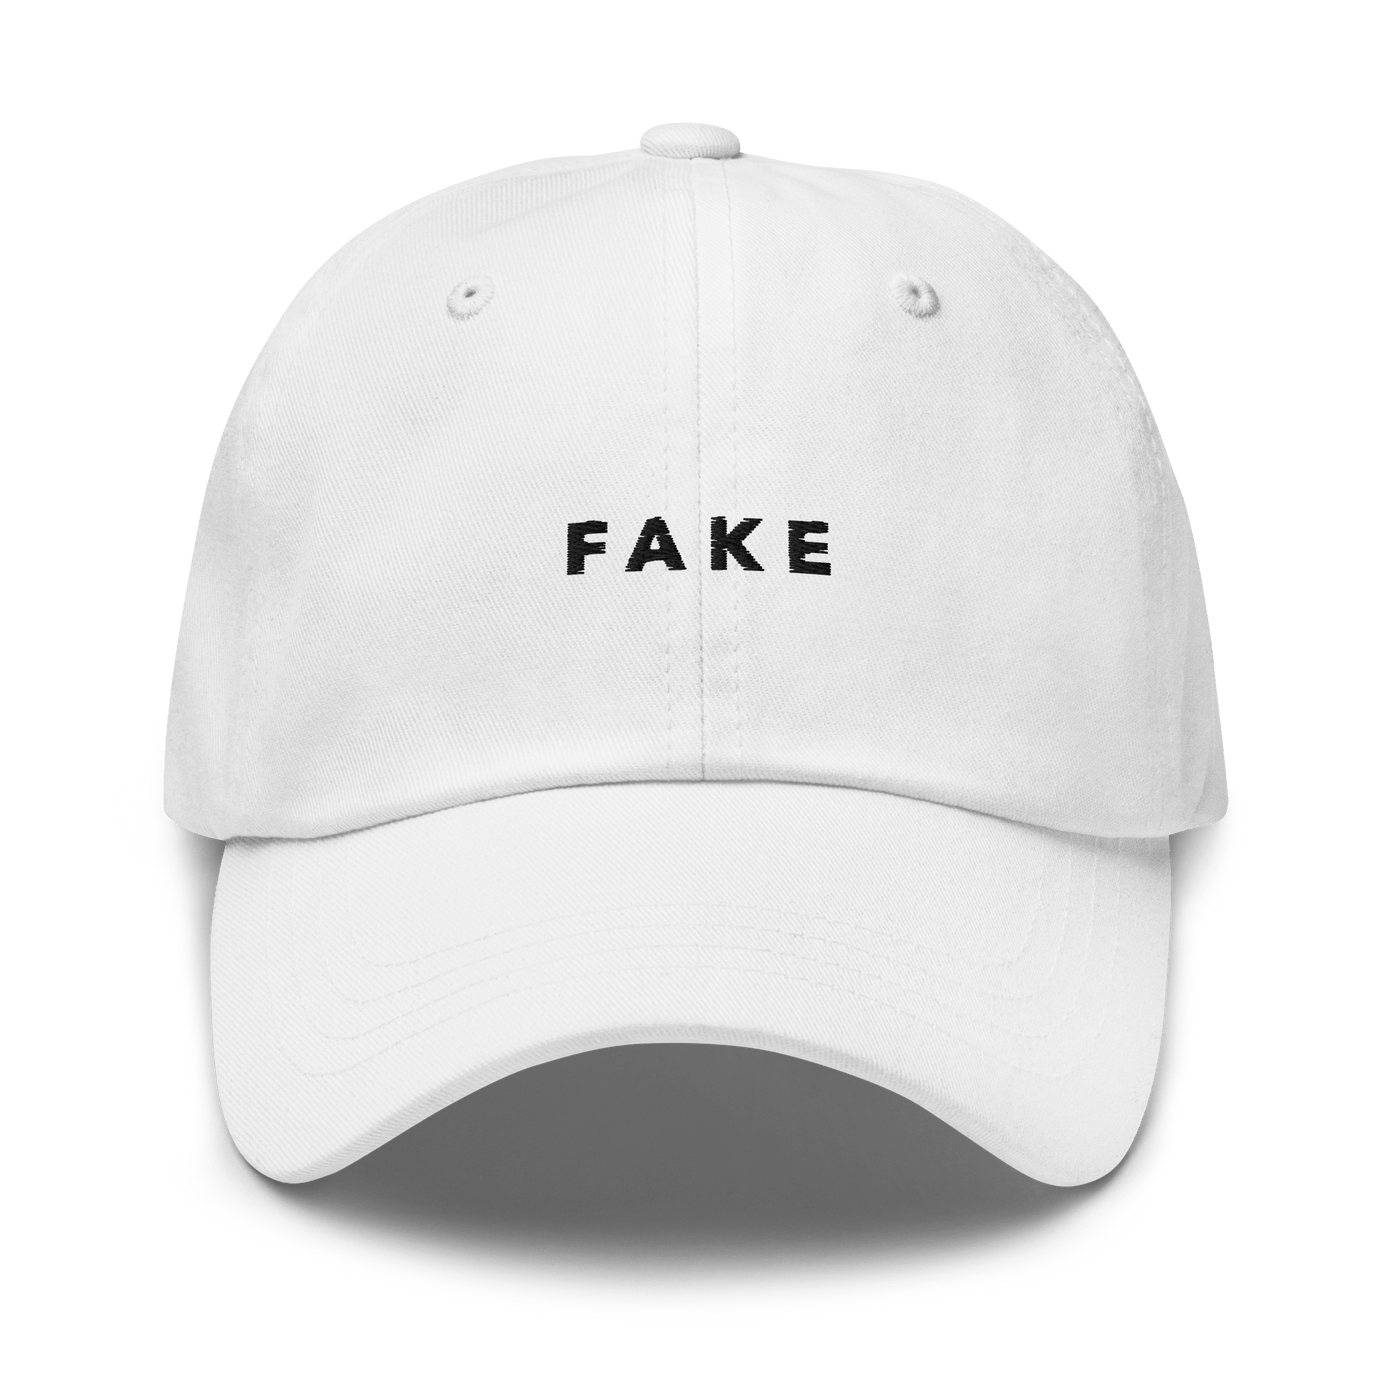 FAKE Dad hat - White - - Just Another Cap Store